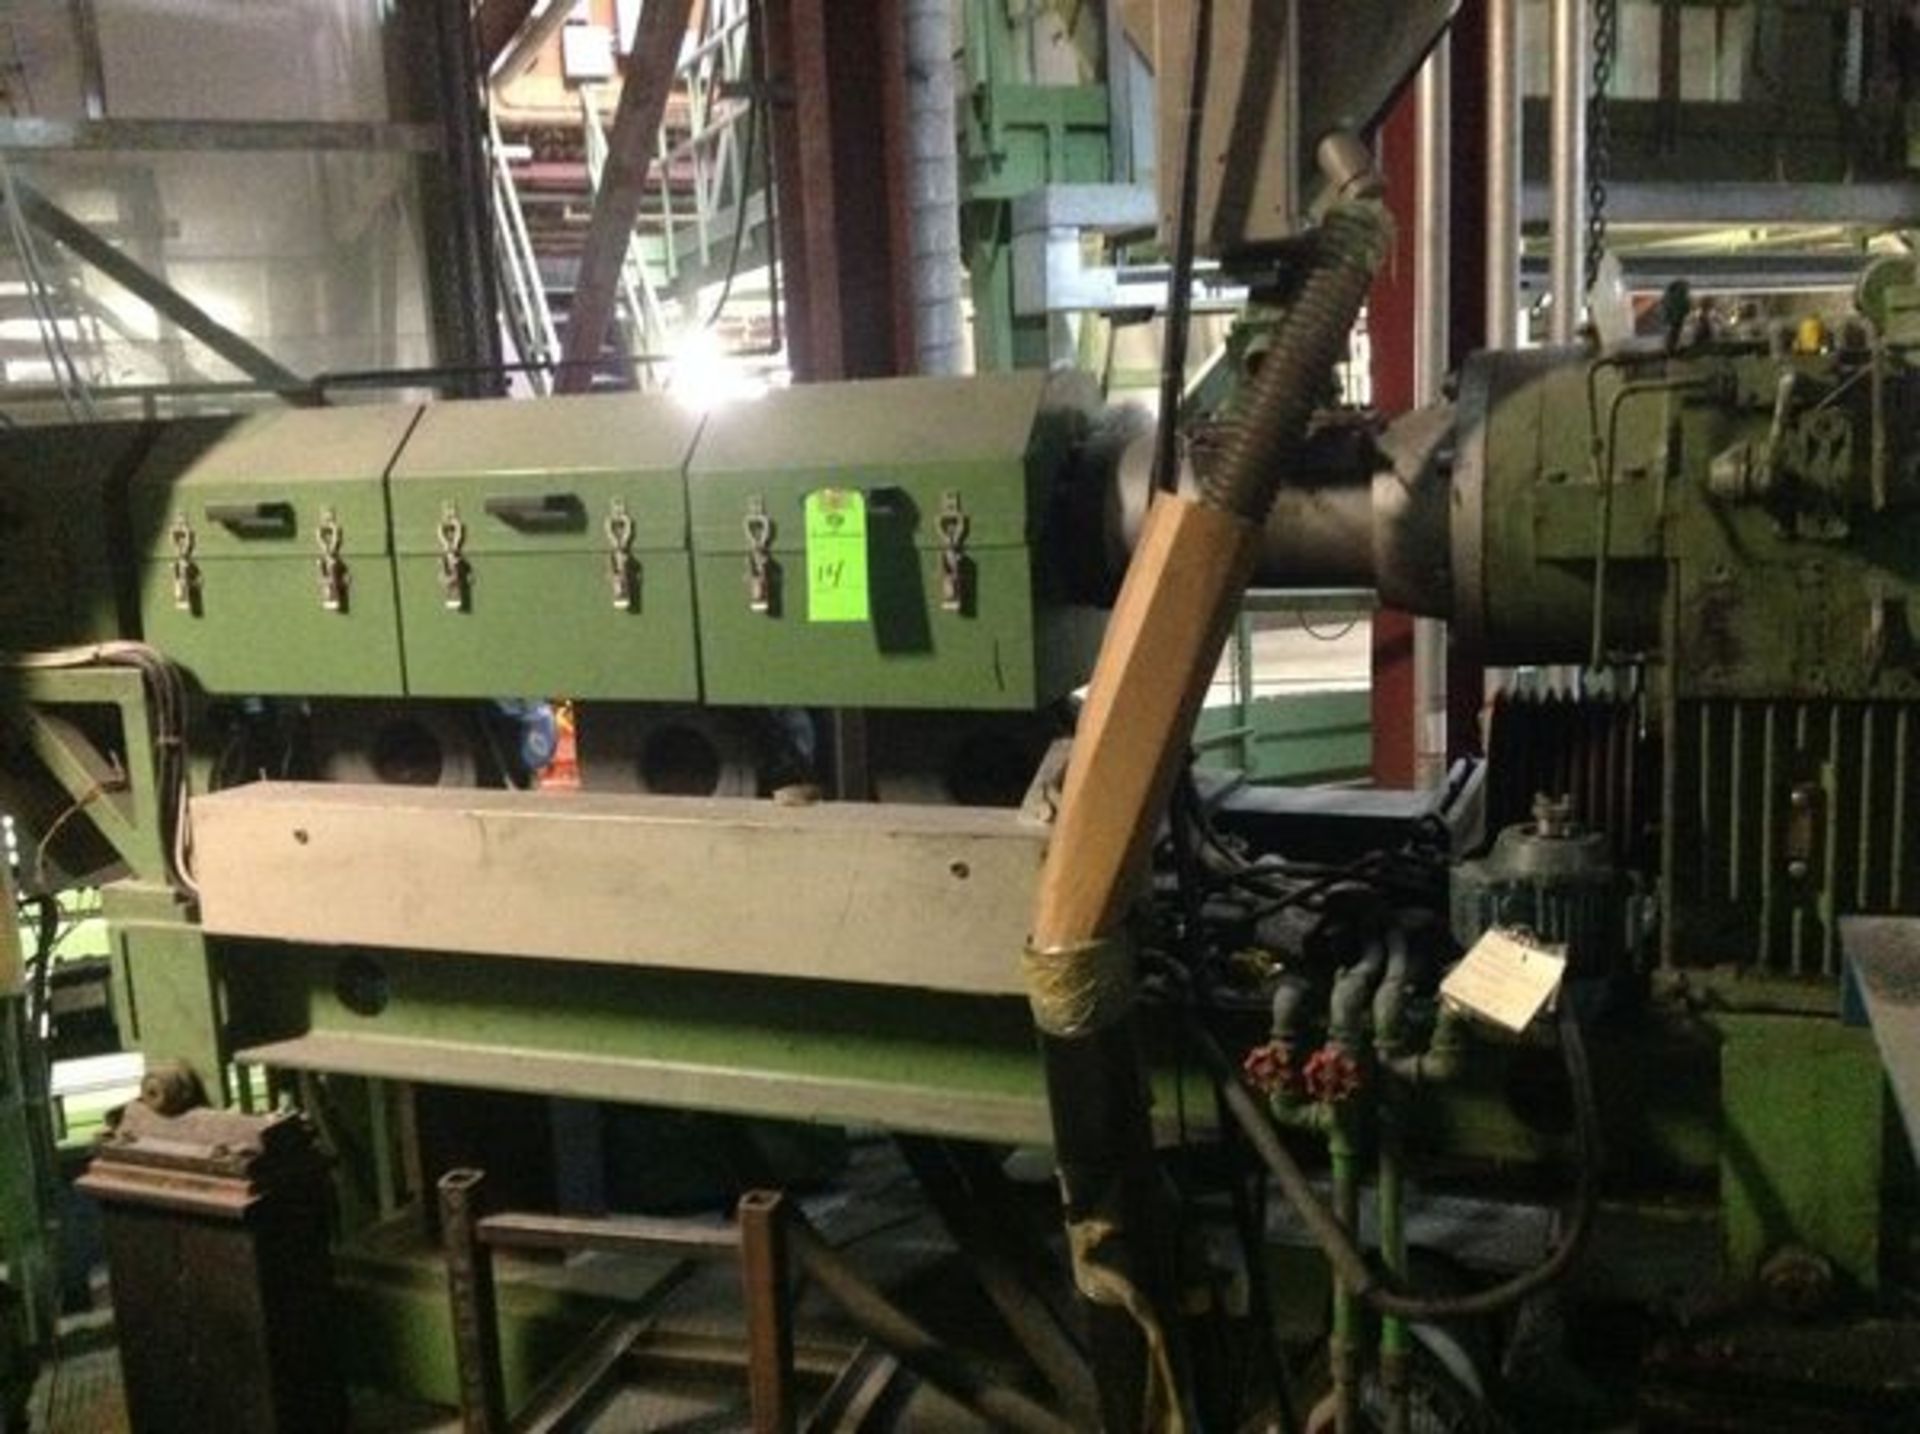 75mm Extruder; 4 heating zones, No motor, with a Zambello RPV 200E gearbox ser-5990. LOCATED IN